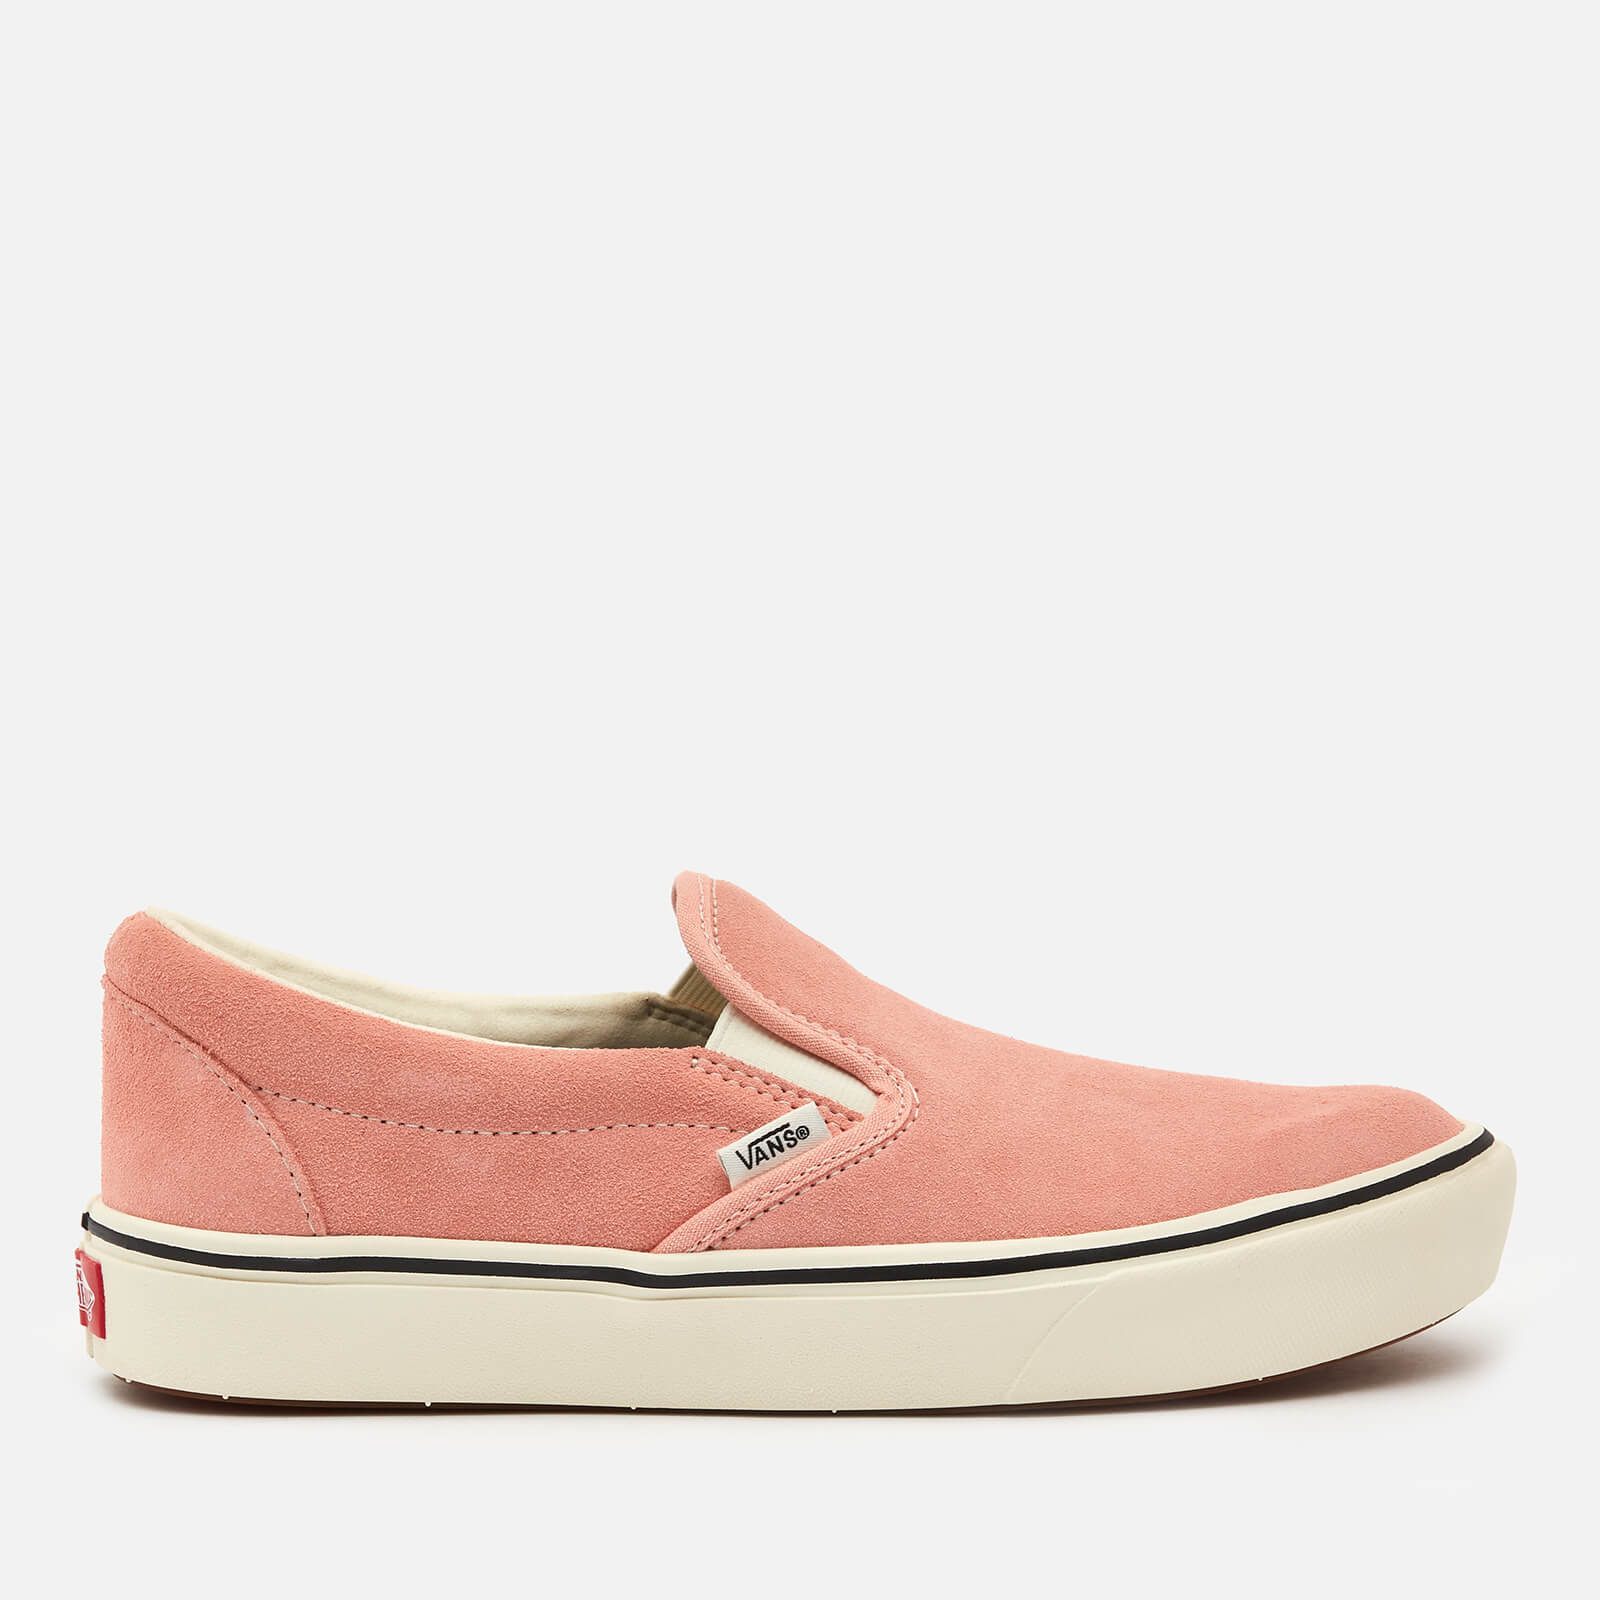 Vans Women's Color Pack Comfycush Slip-On Trainers - Peach Pearl - UK 3